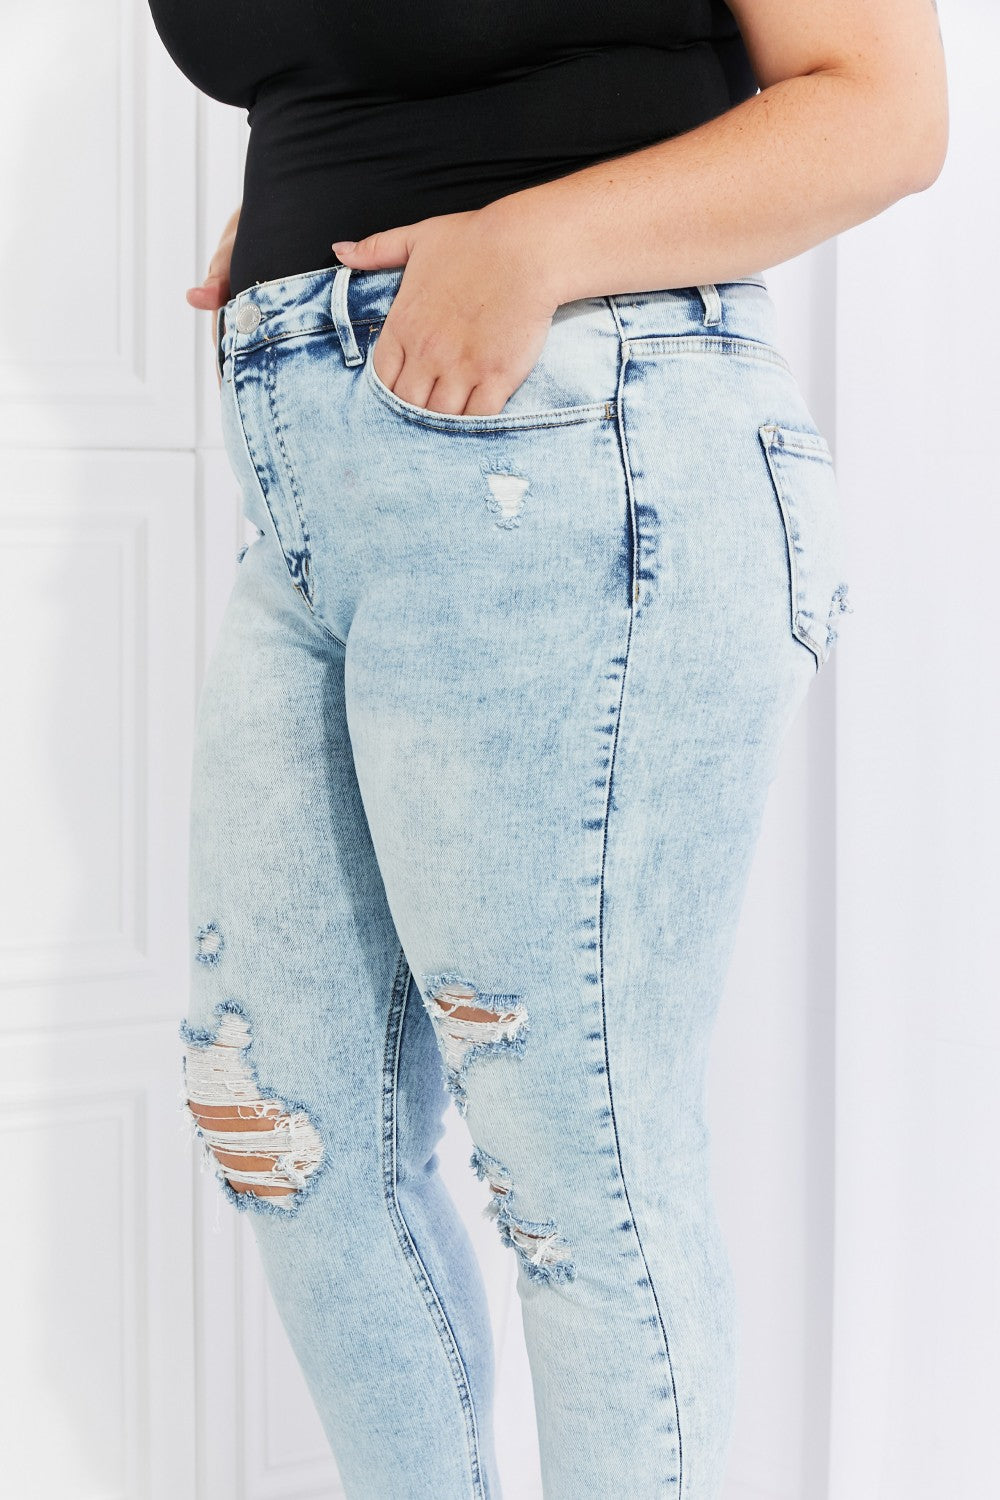 VERVET On The Road Full Size Distressed Jeans